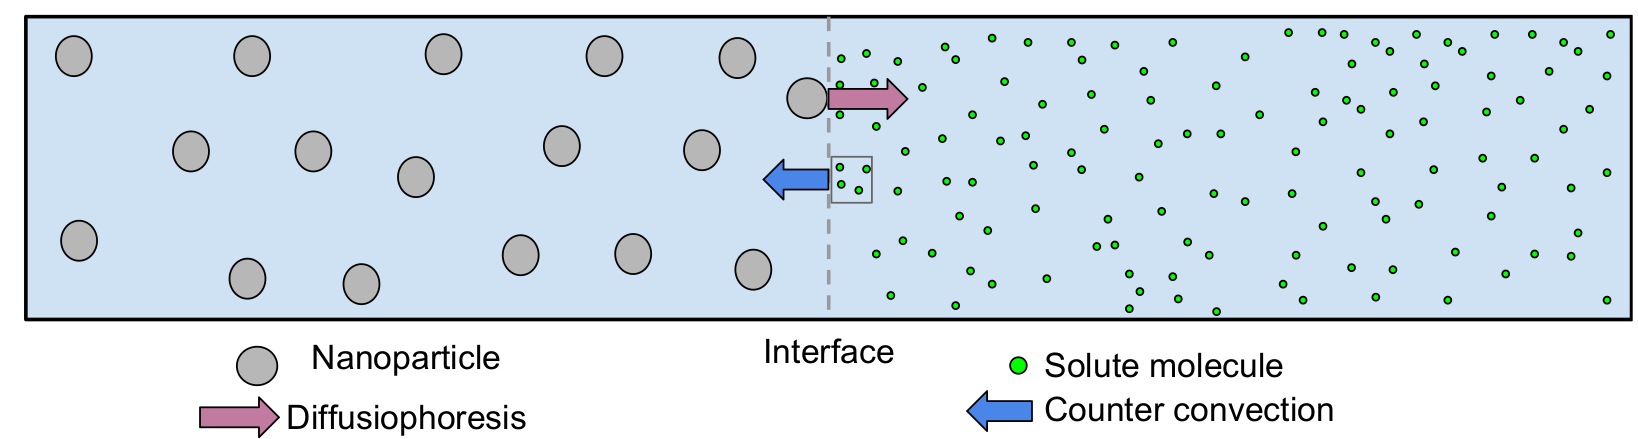 Diffusiophoretic motion of nano-particle induces a counter-convective motion, resulting in an apparent increase in the "diffusion" or mass transfer of the dye. of dye solution